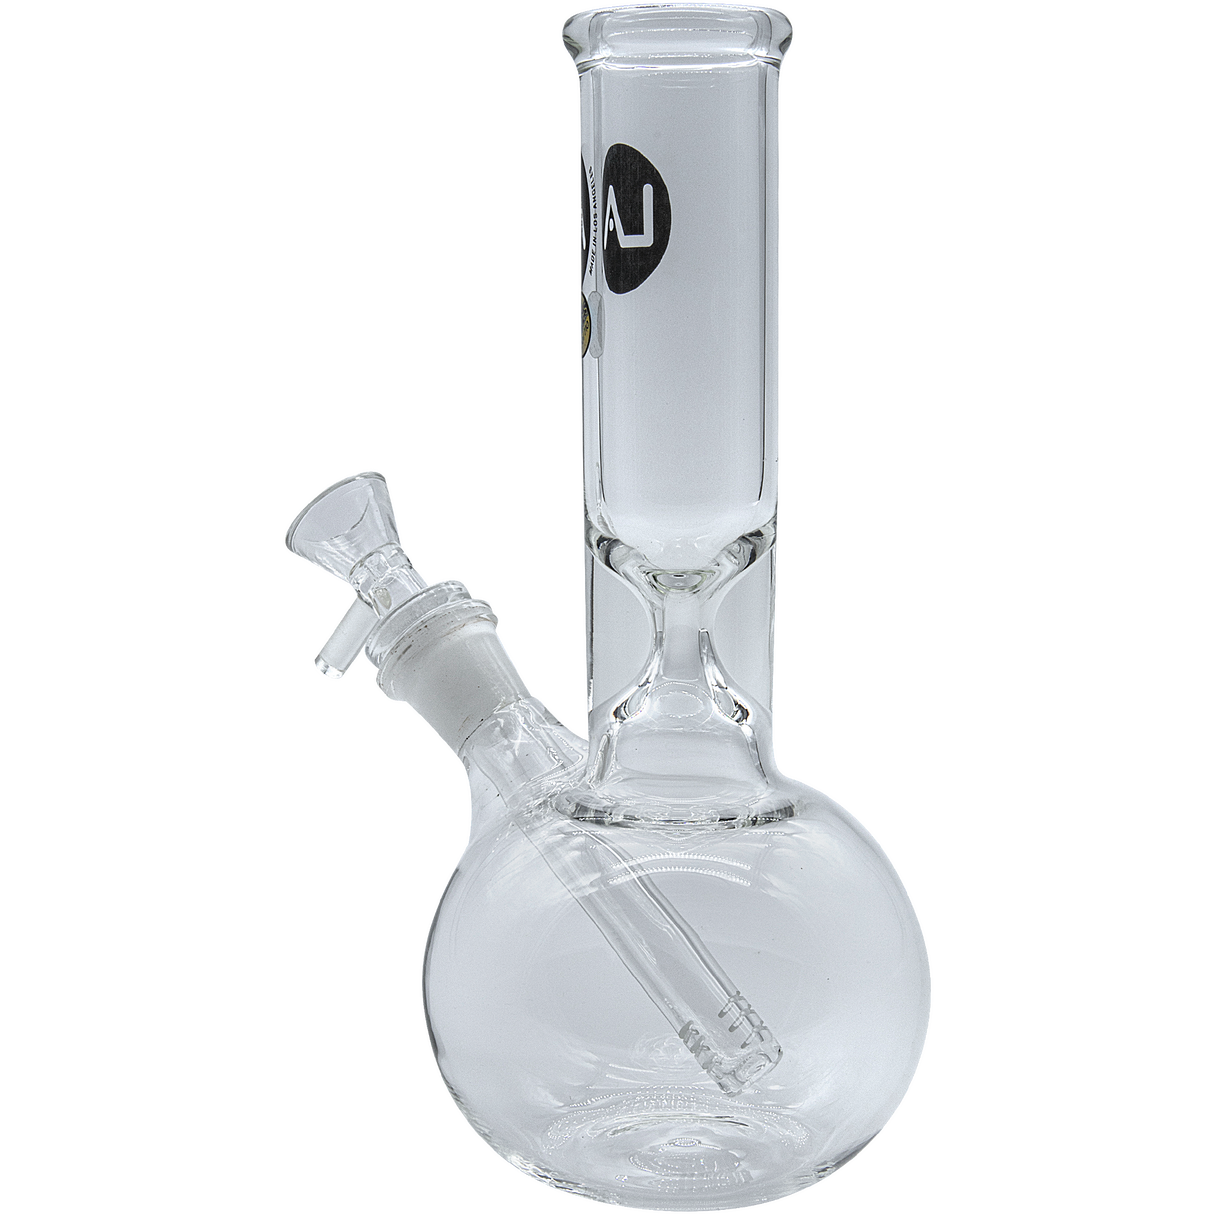 LA Pipes "Baller" Bubble Base Bong in Borosilicate Glass - Front View on White Background